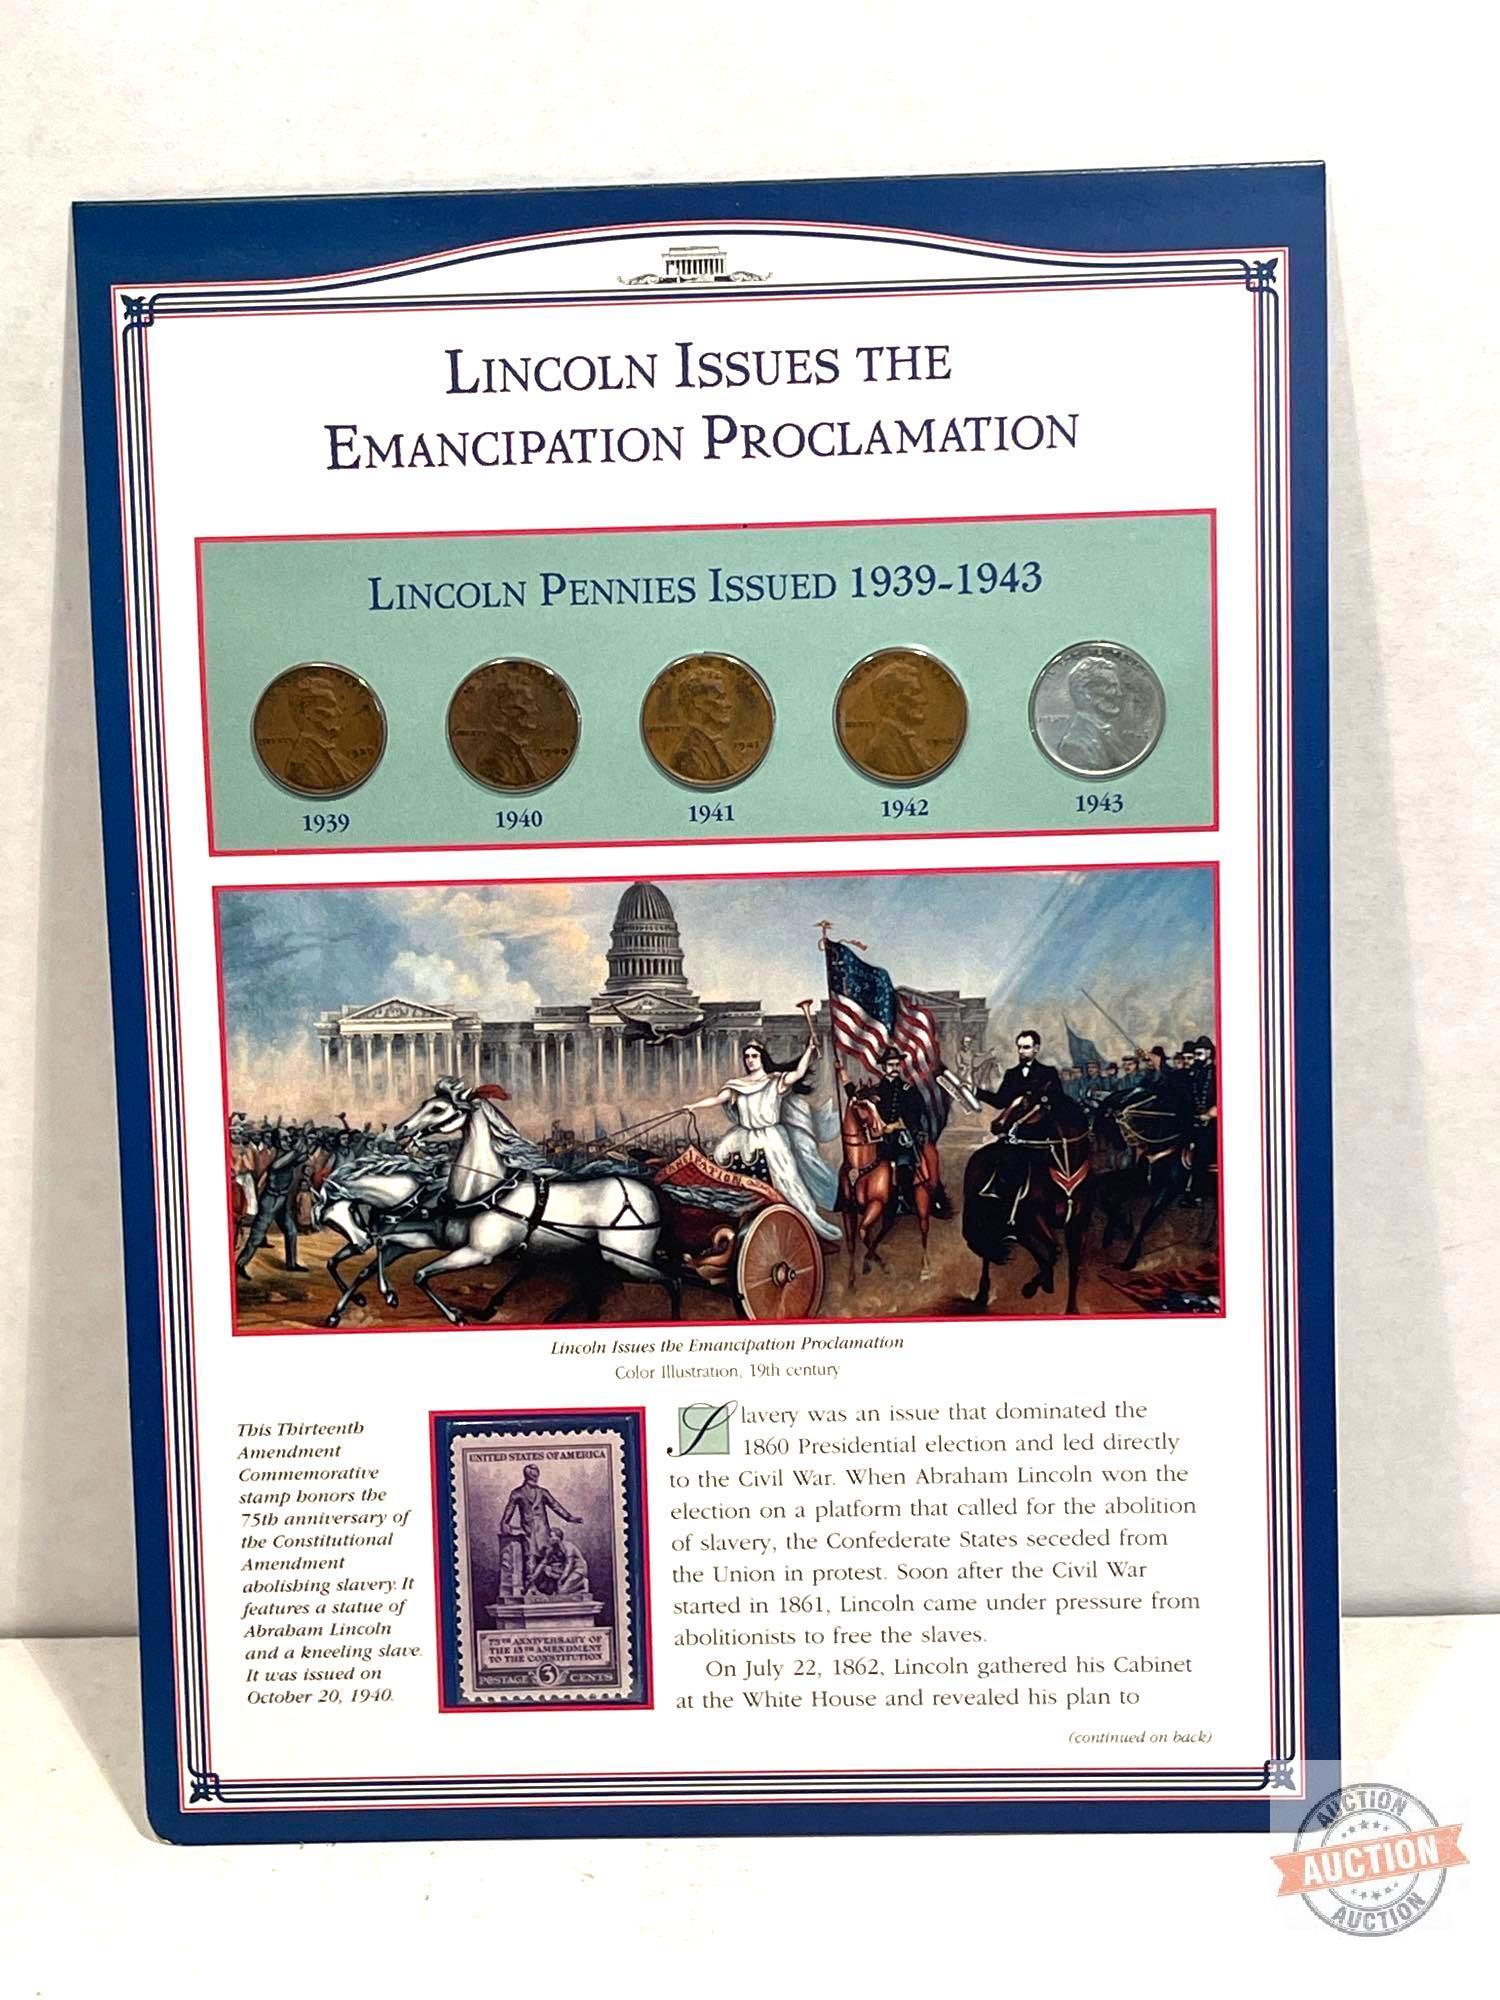 The Lincoln Coins & Stamps, 1909-1958, 10 Sheets of 5 coins and stamps